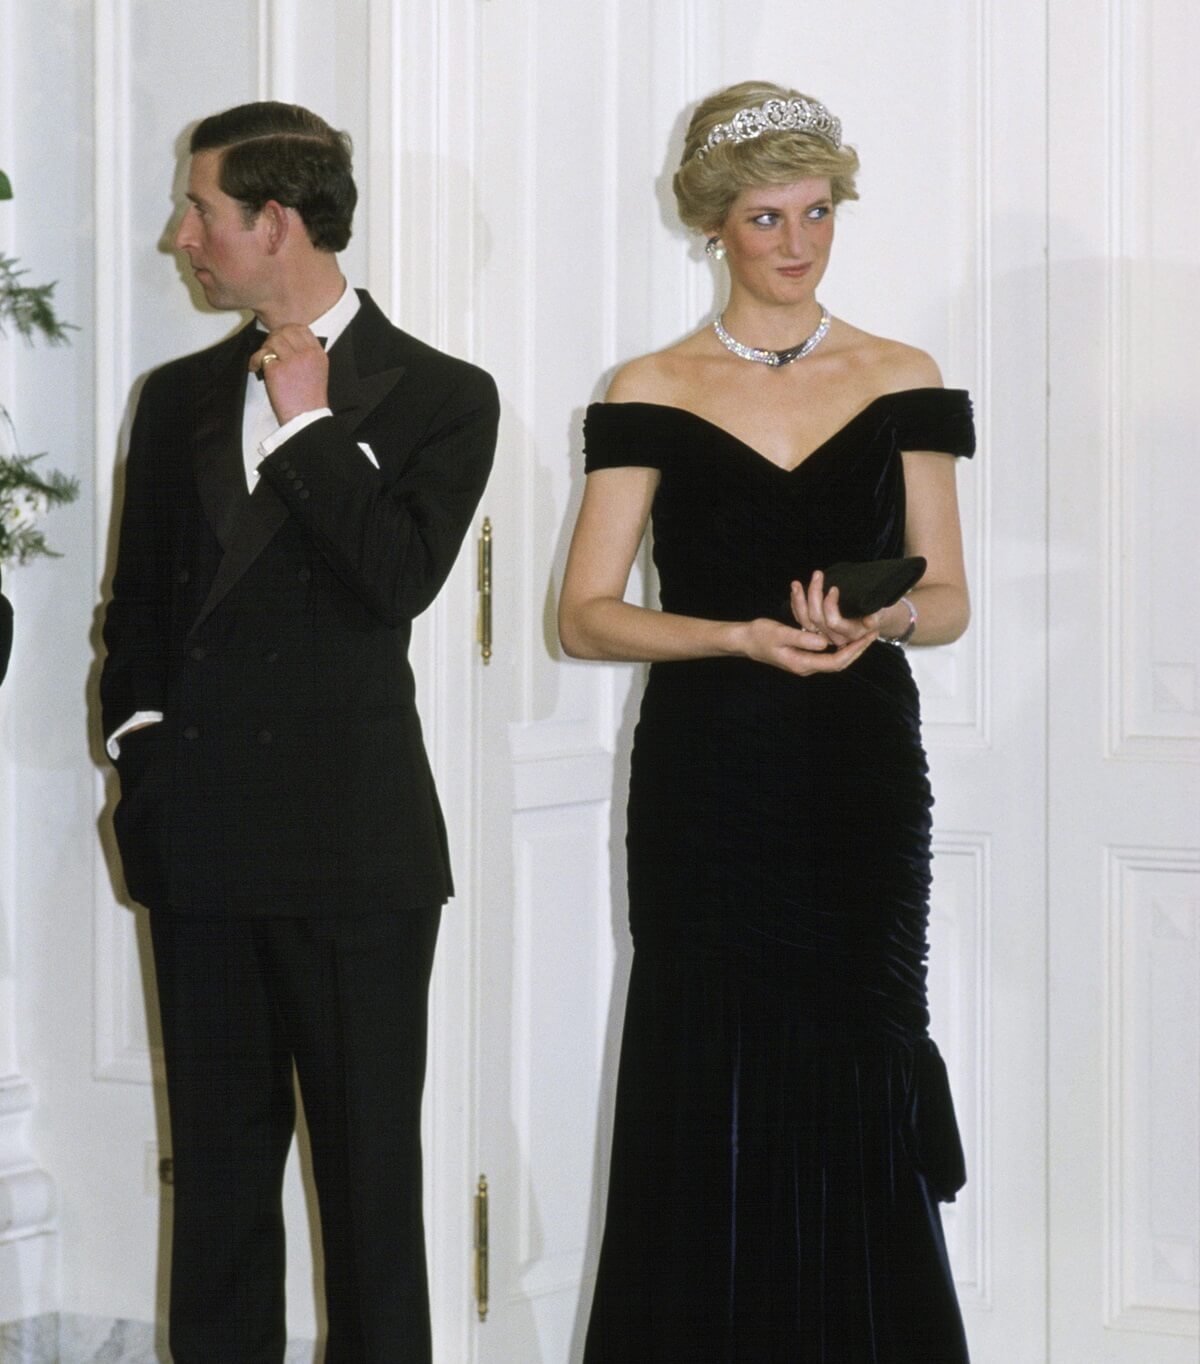 Then-Prince Charles and Princess Diana attend a reception in Germany